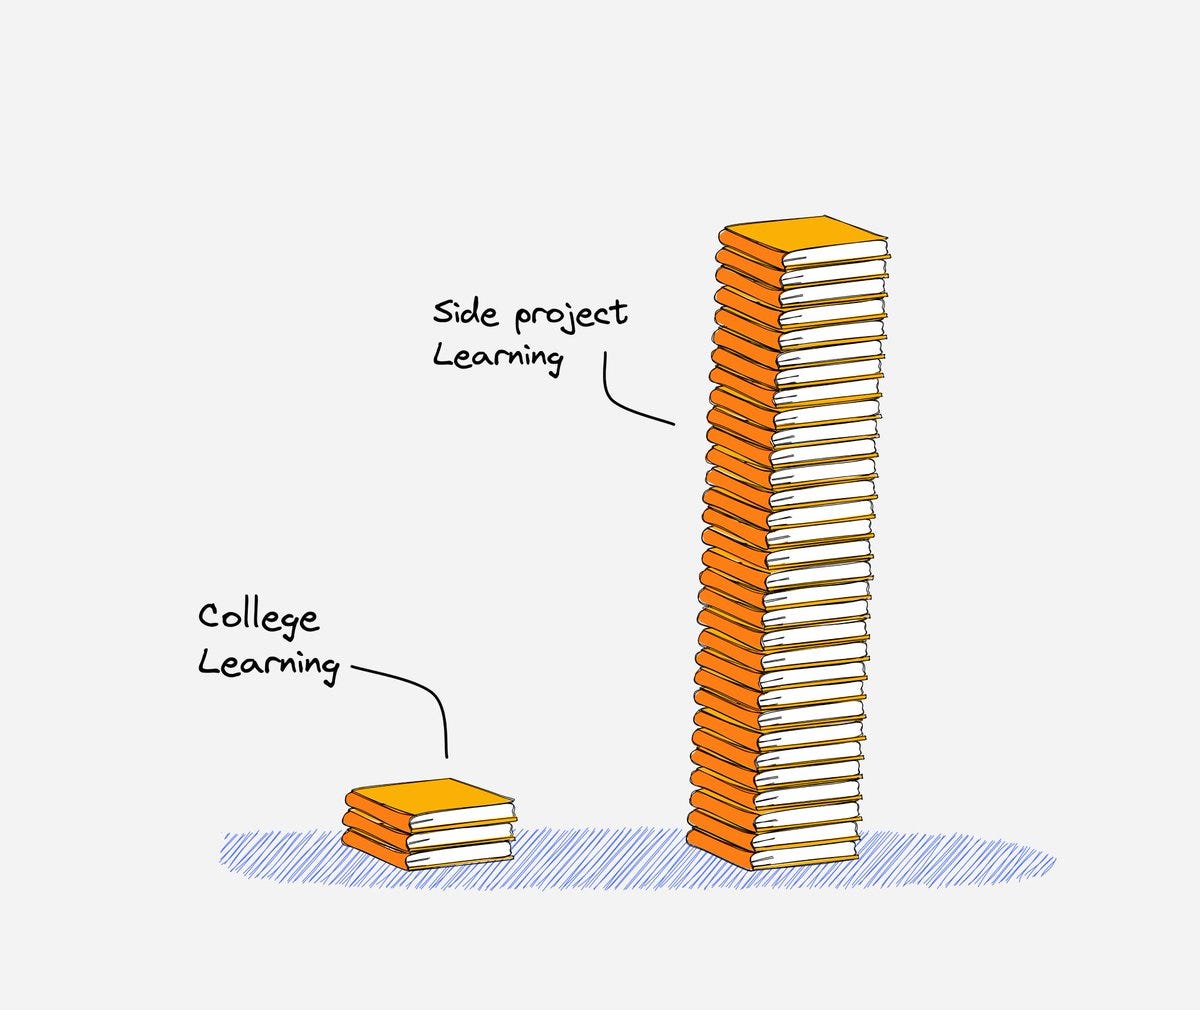 side projects increases your learning